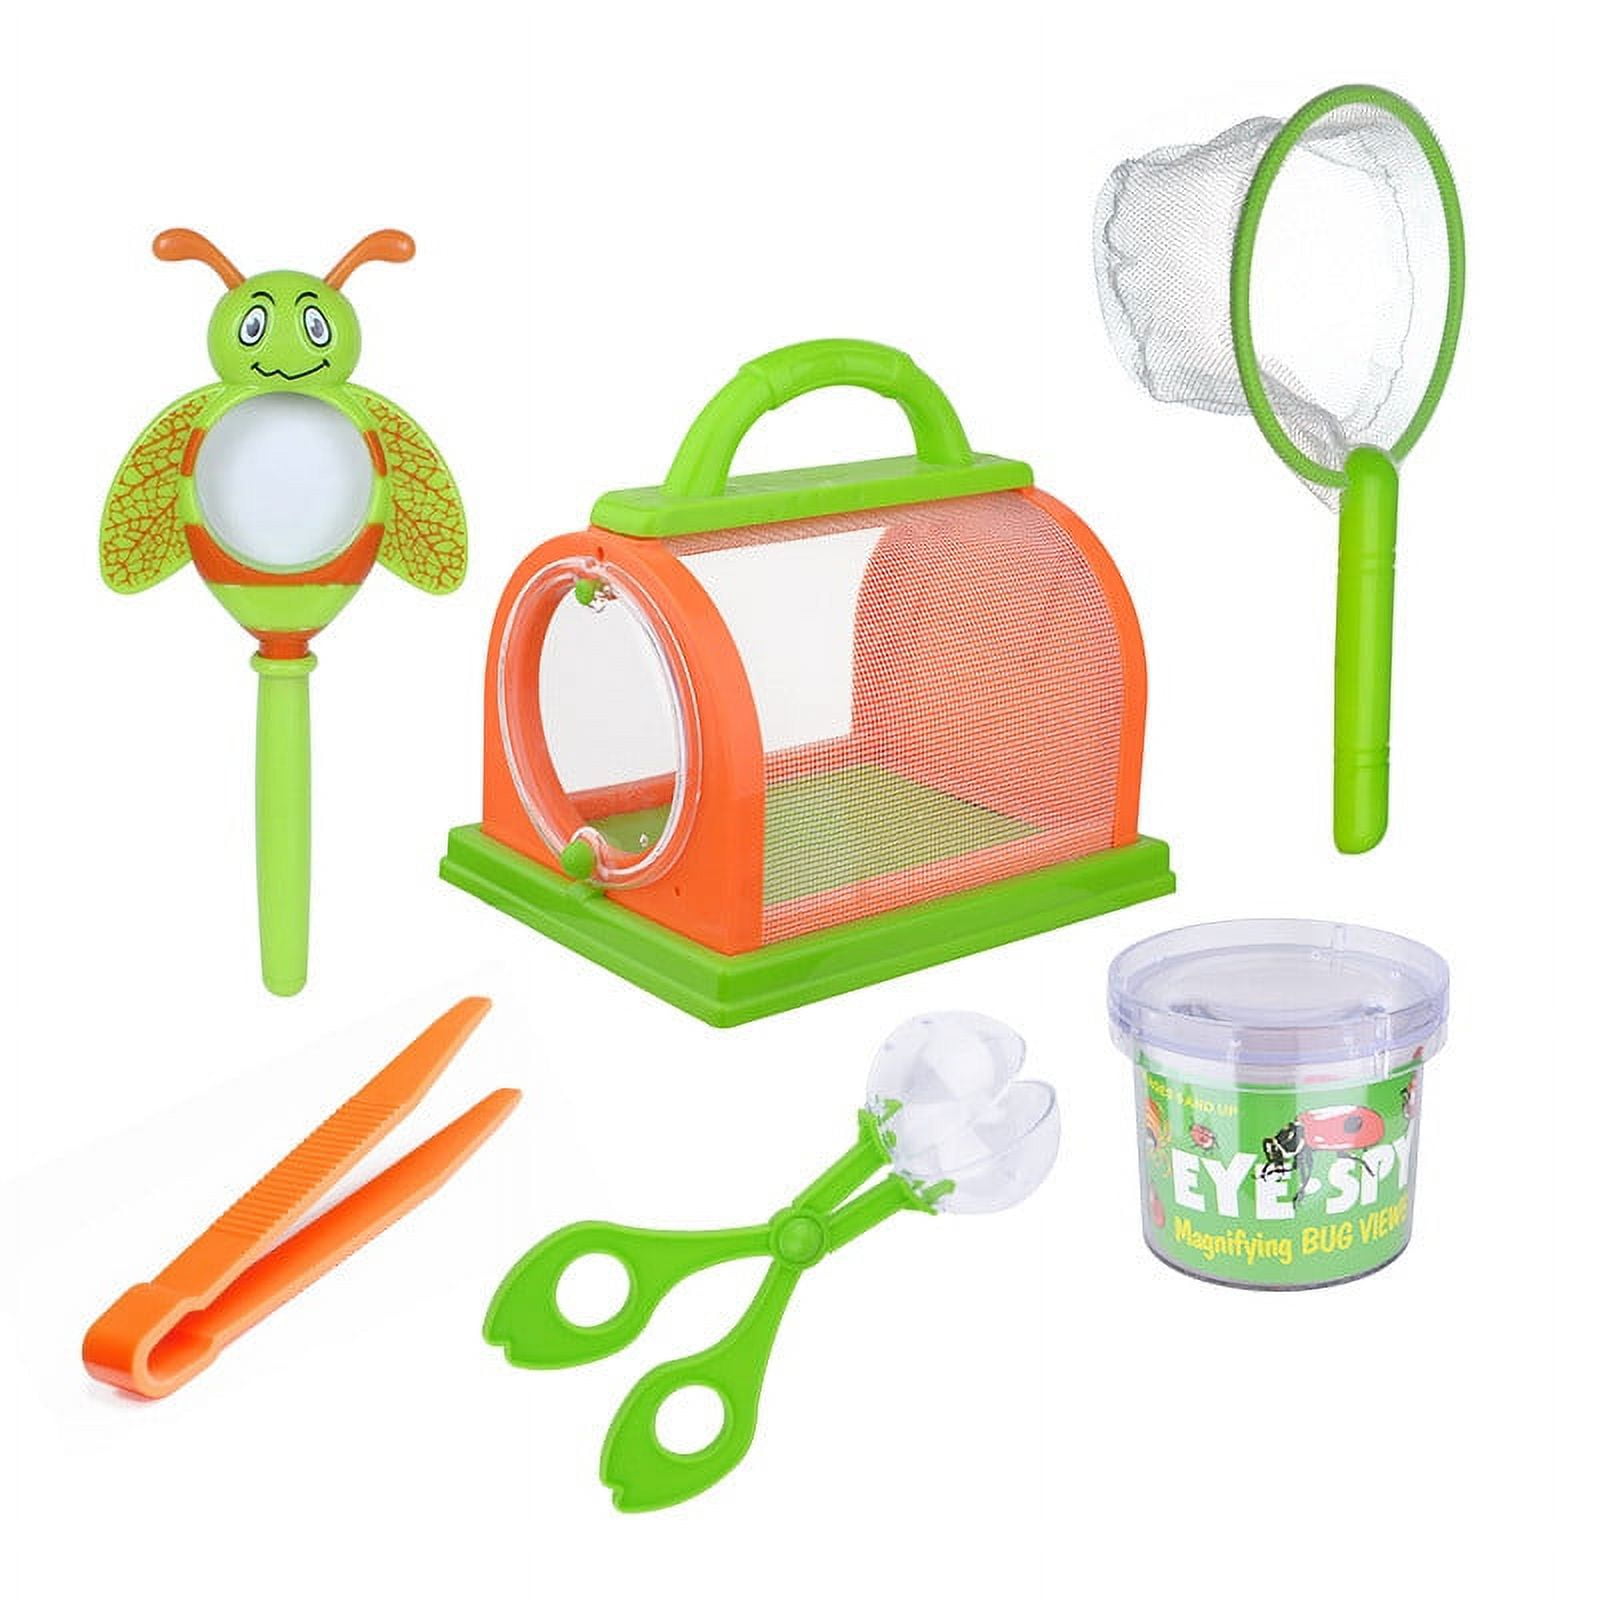 Kids Toy Outdoor Explorer Set Toys, Children Explorer Explorer Set Belt  Insect Cage Magnifying Glass Observation Box Insect Trap TweezersGifts for